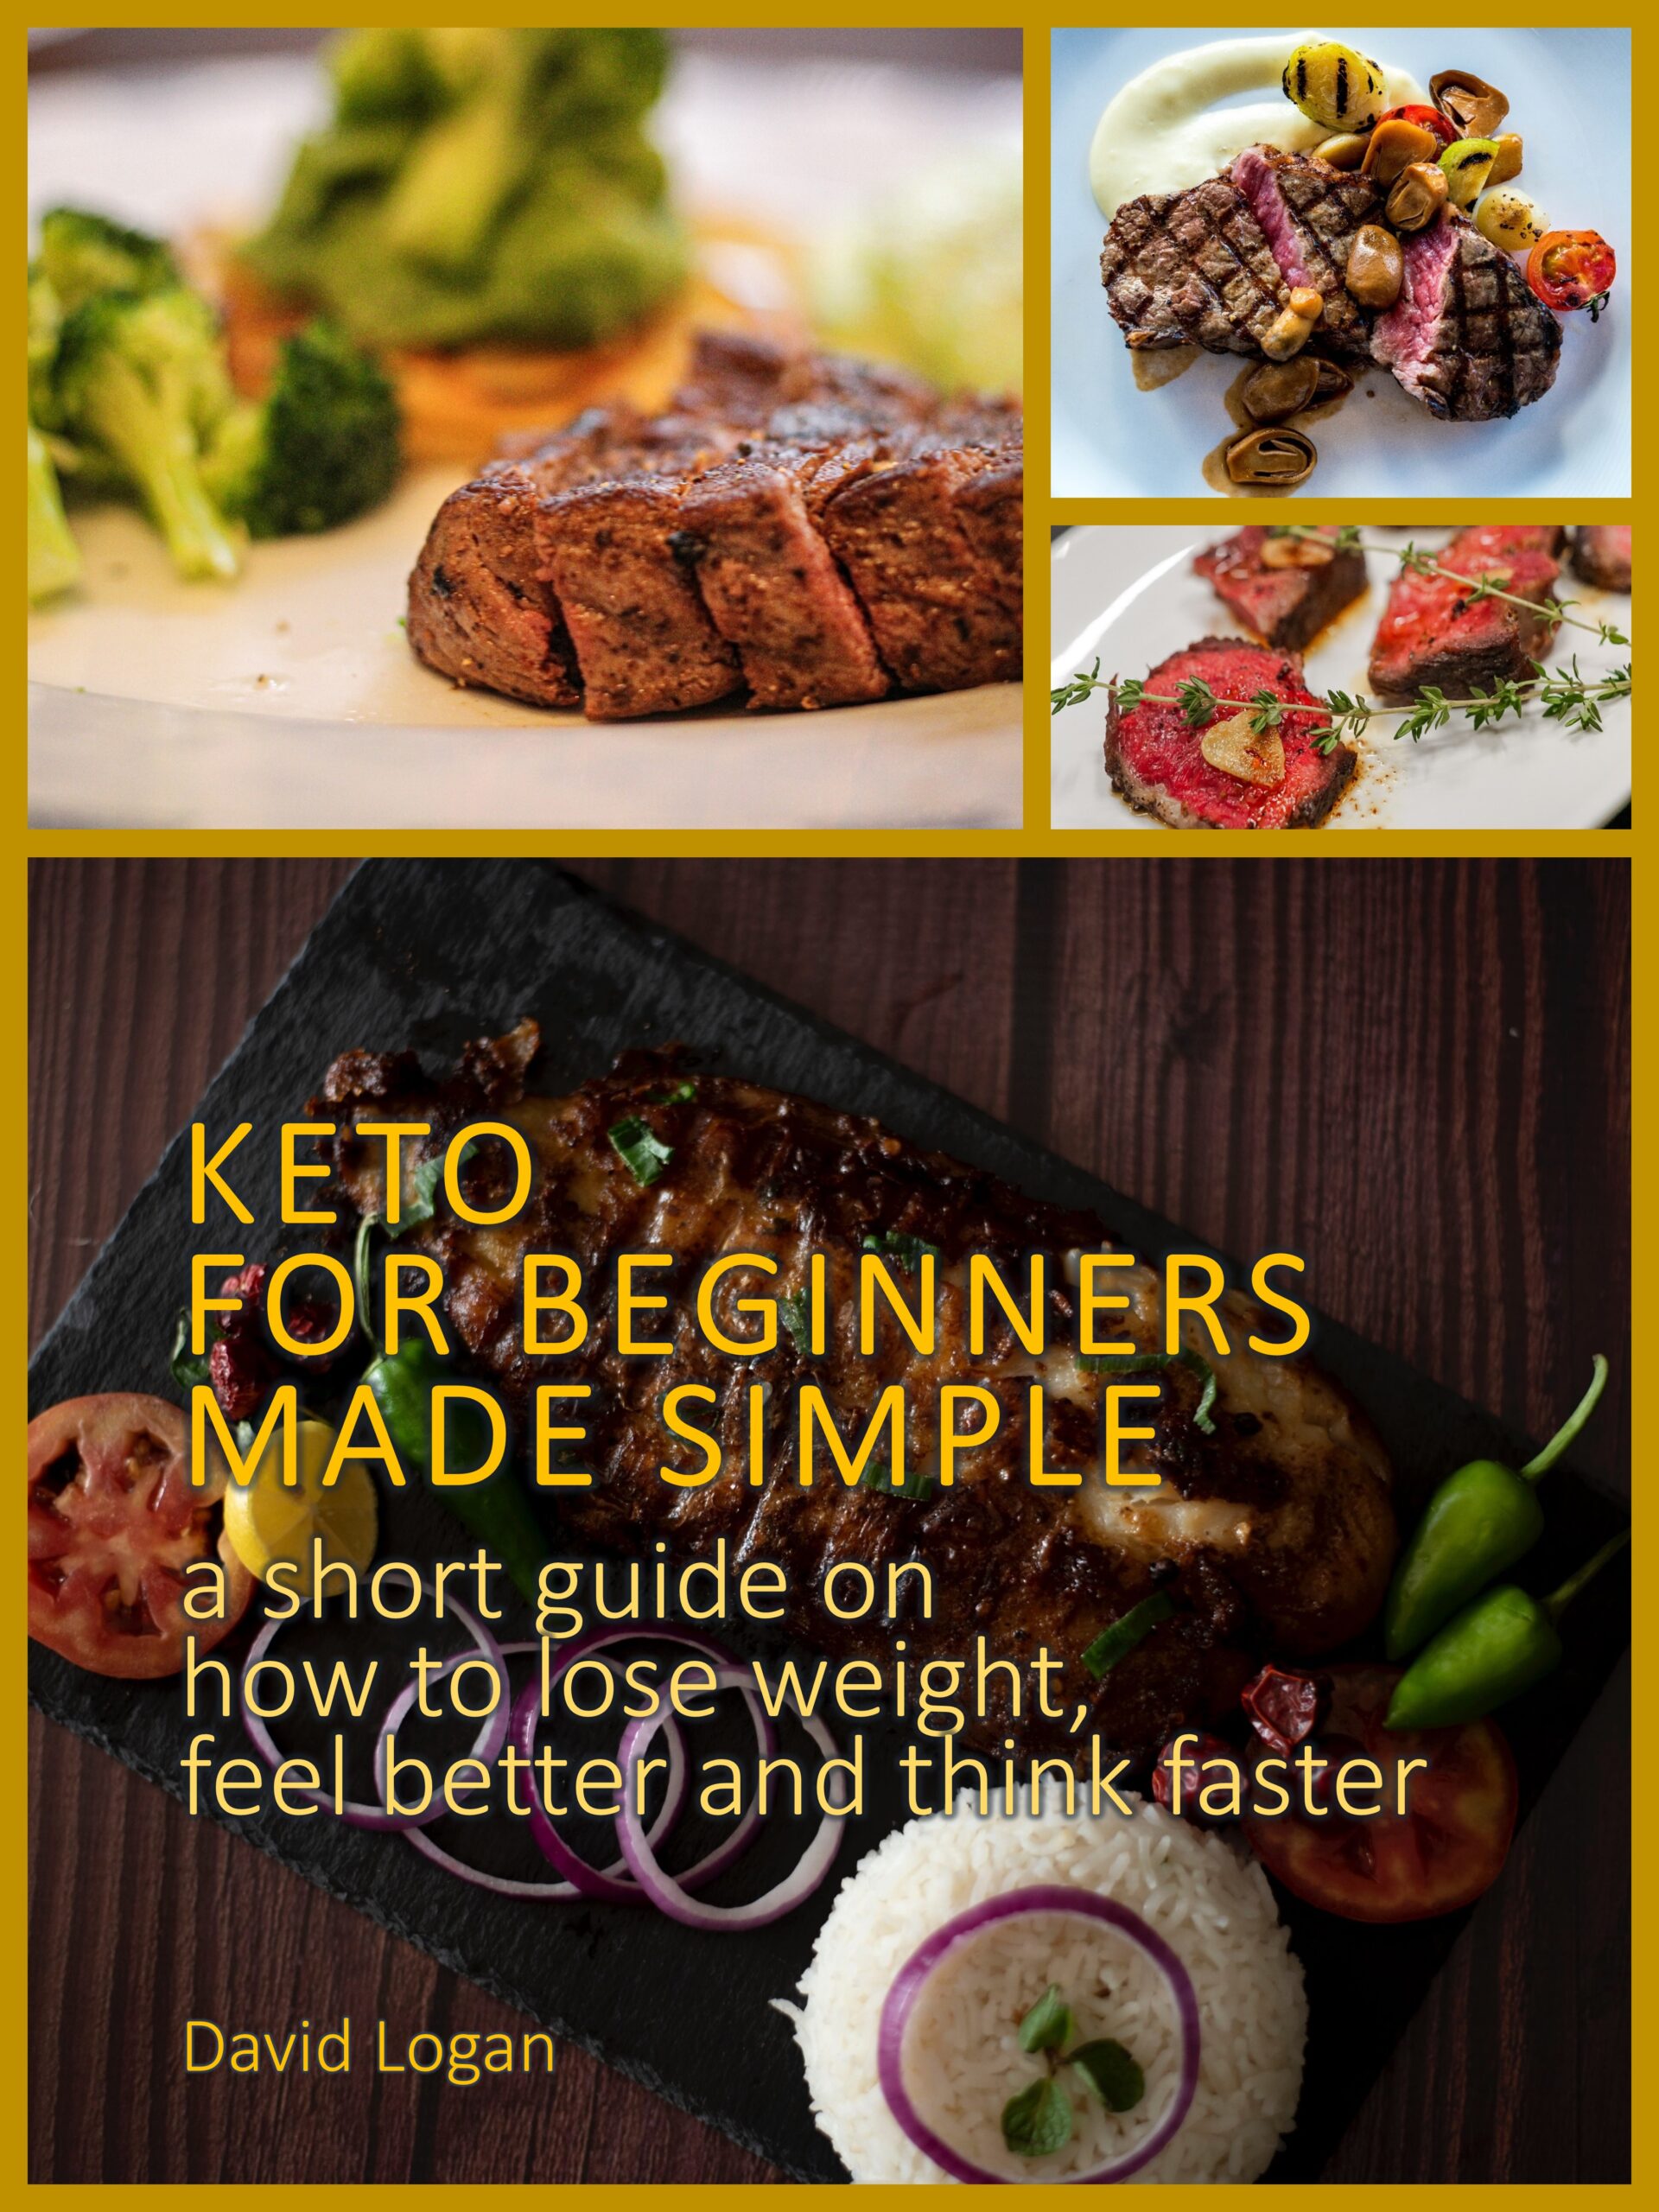 FREE: Keto for beginners made simple: A short guide on how to lose weight, feel better and think faster by David Logan